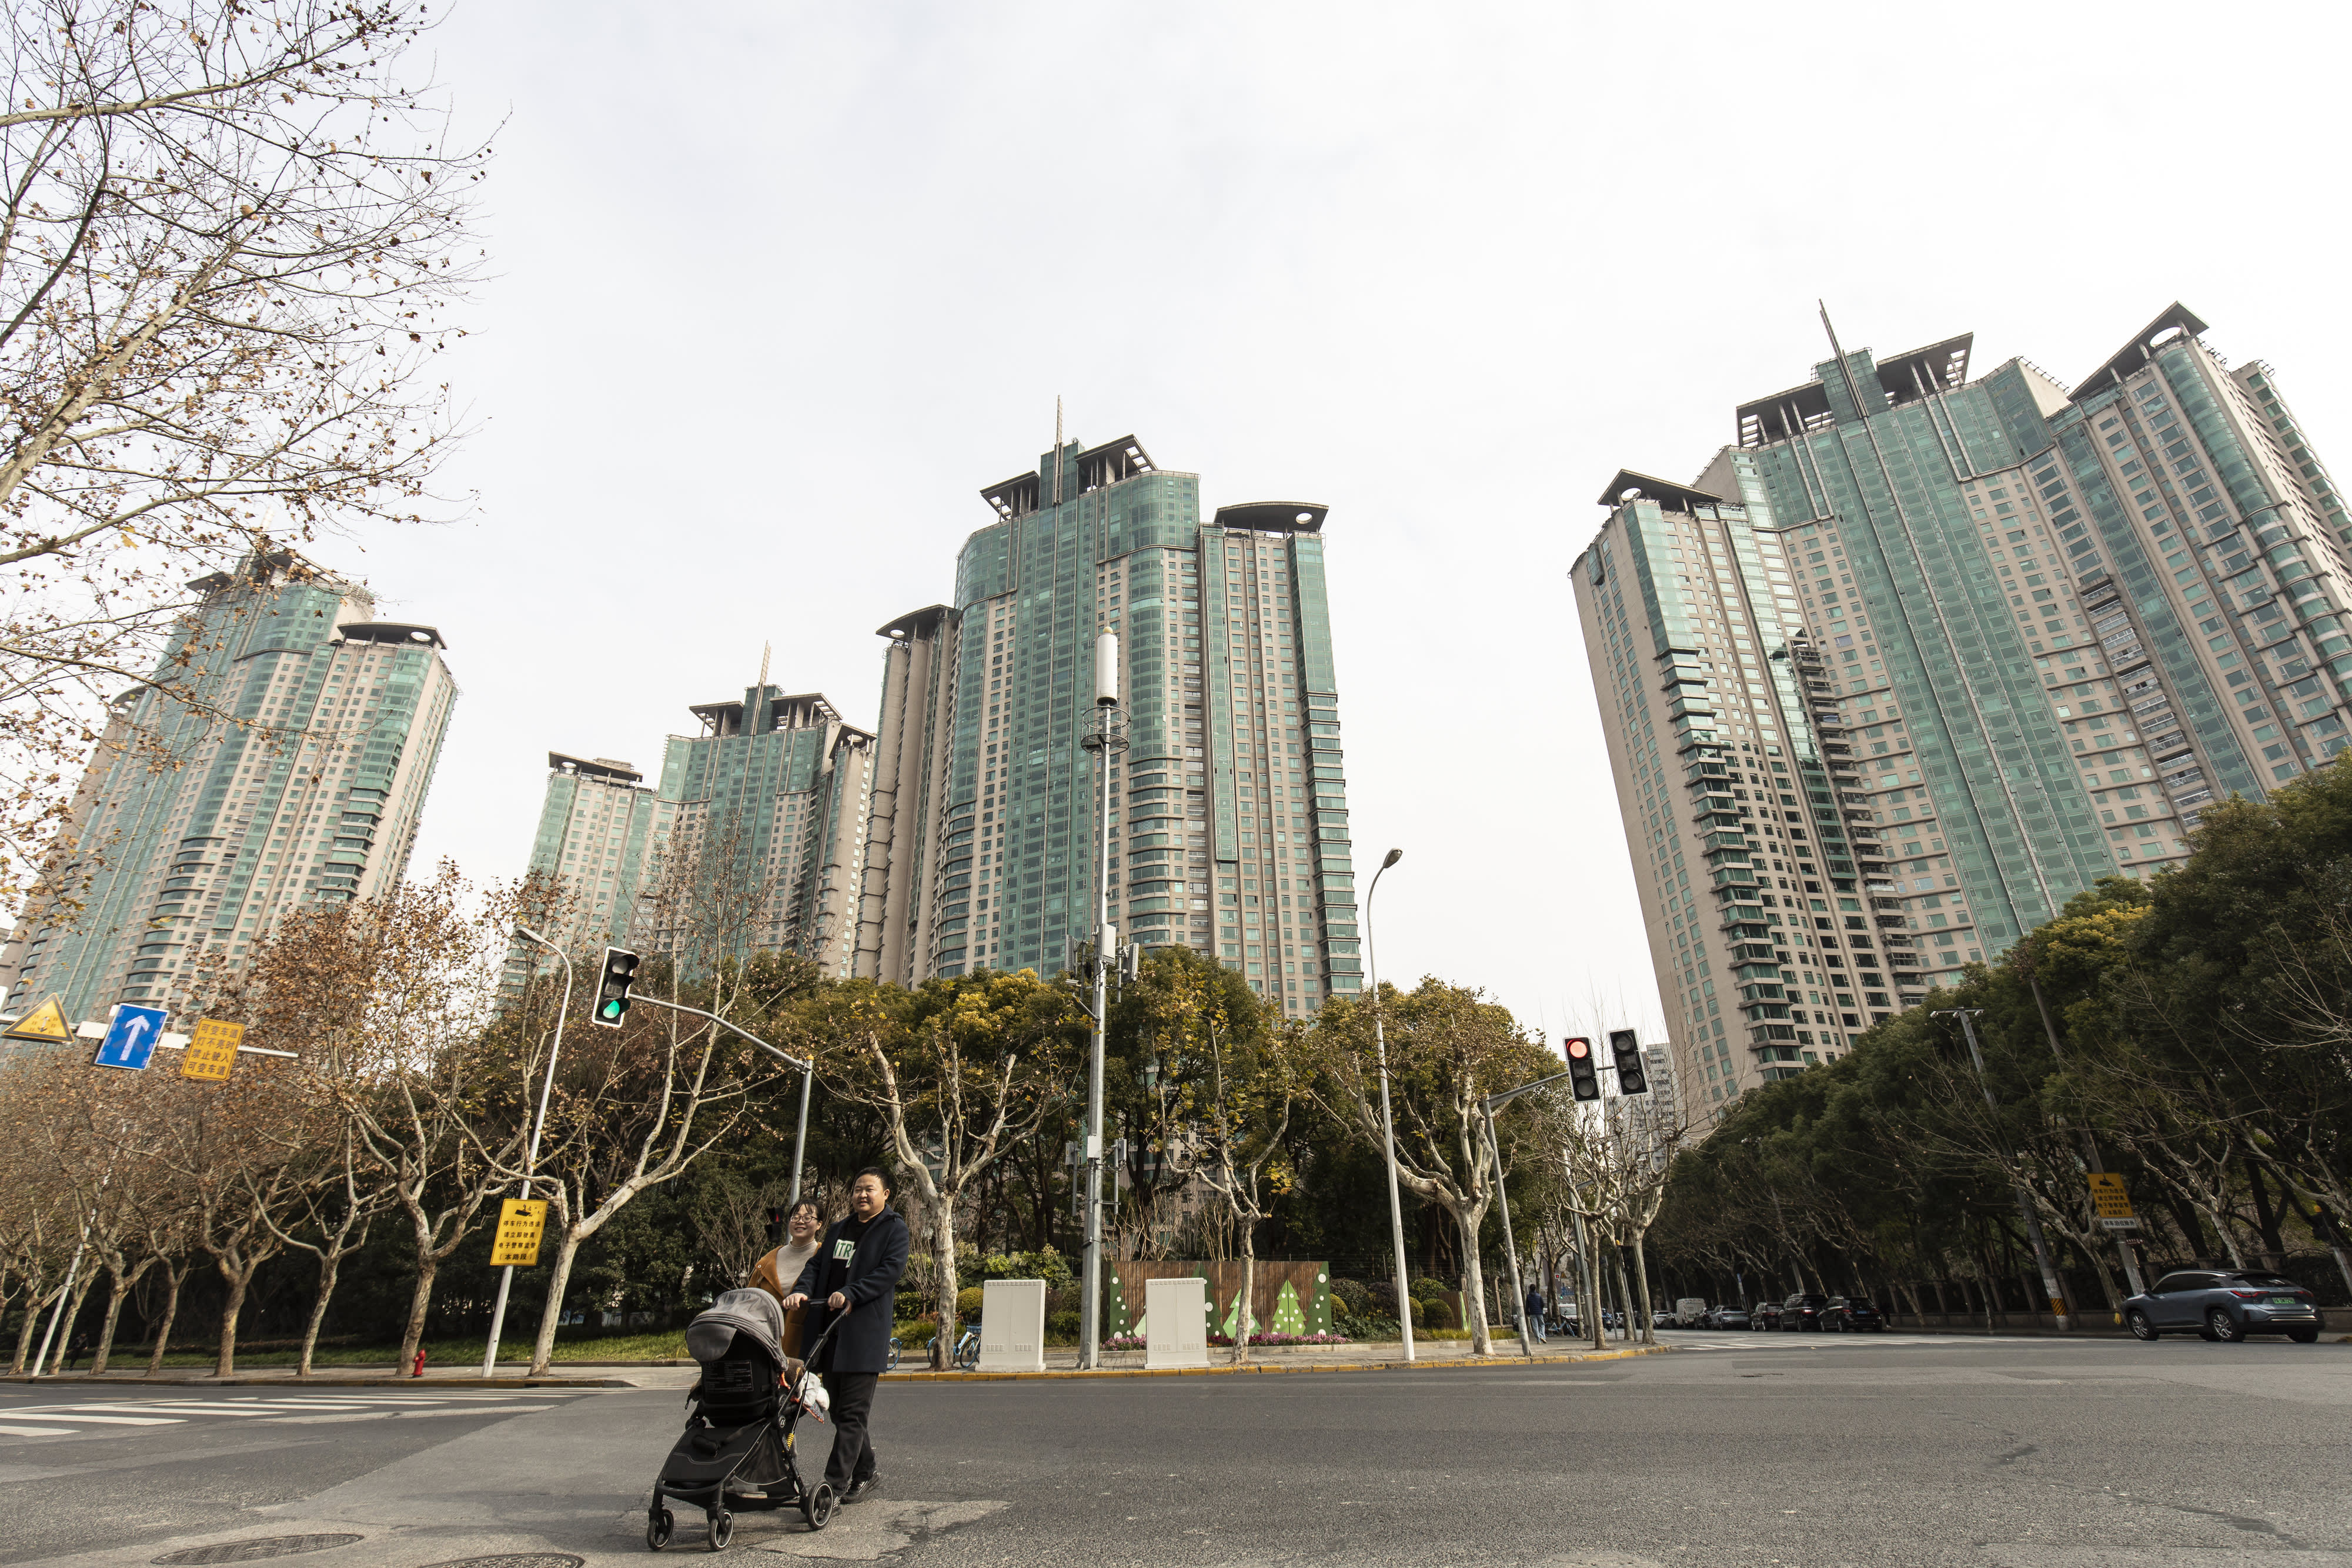 Shimao jumps on report it’s selling all of its real estate projects